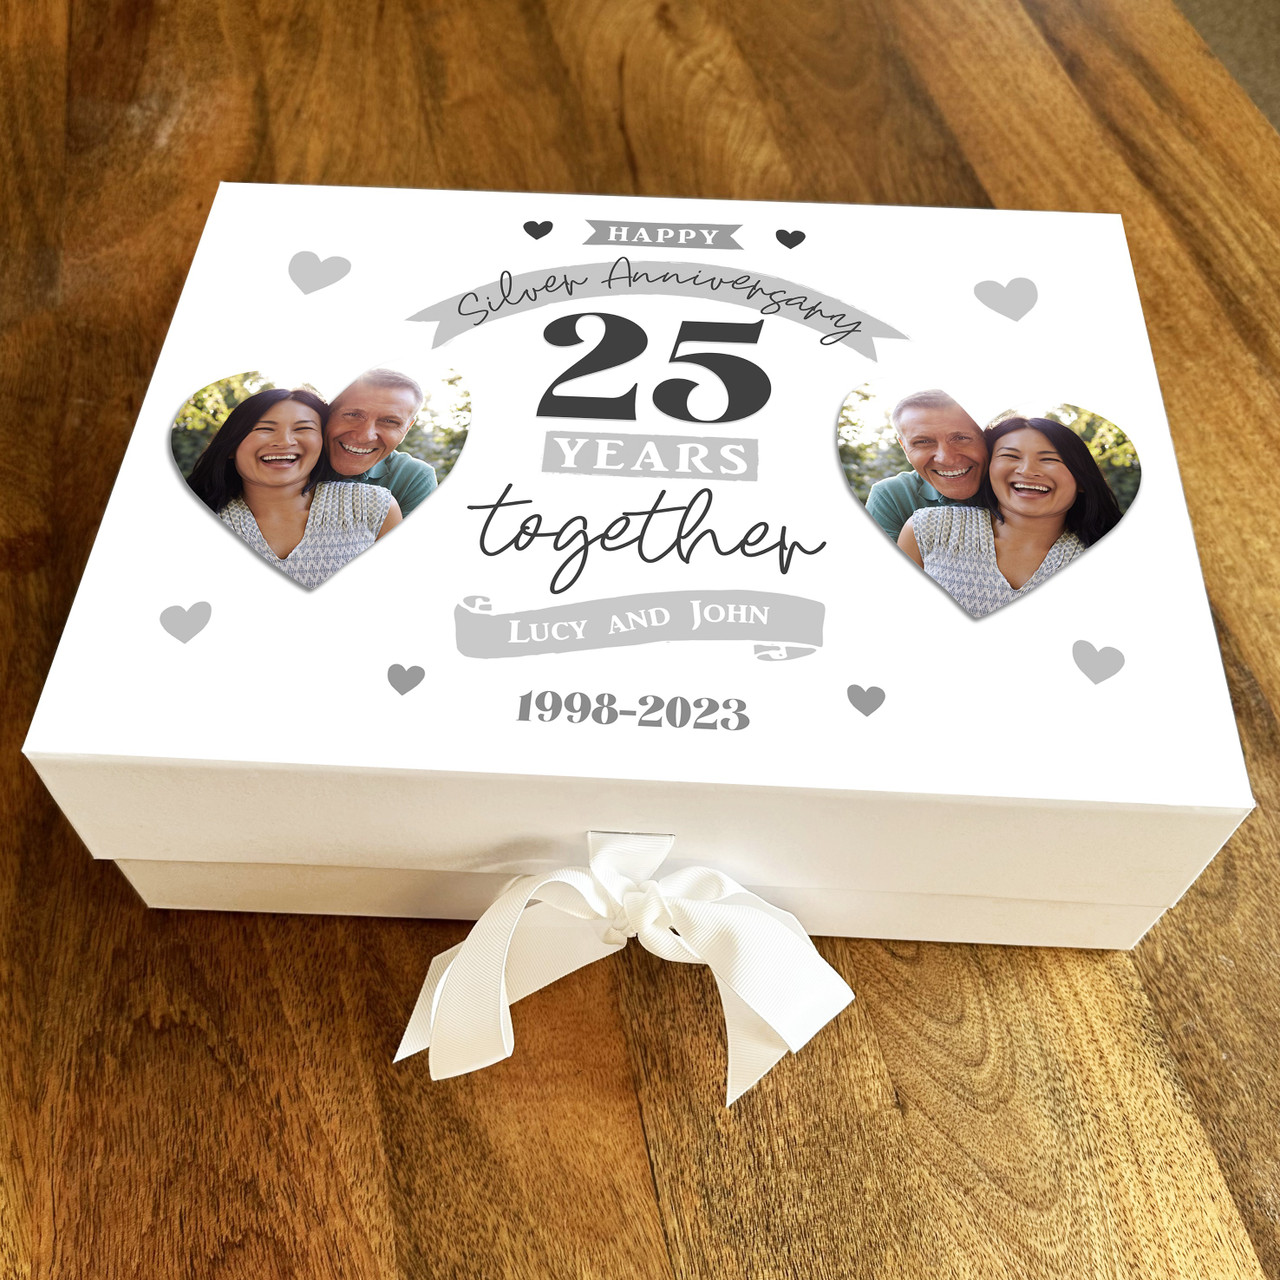 Buy 25th SILVER WEDDING ANNIVERSARY Commemorative in Gift Box.  Husband/wife/parents/friends. Gift/present. 25 Years Together. Love/marriage  Online in India - Etsy